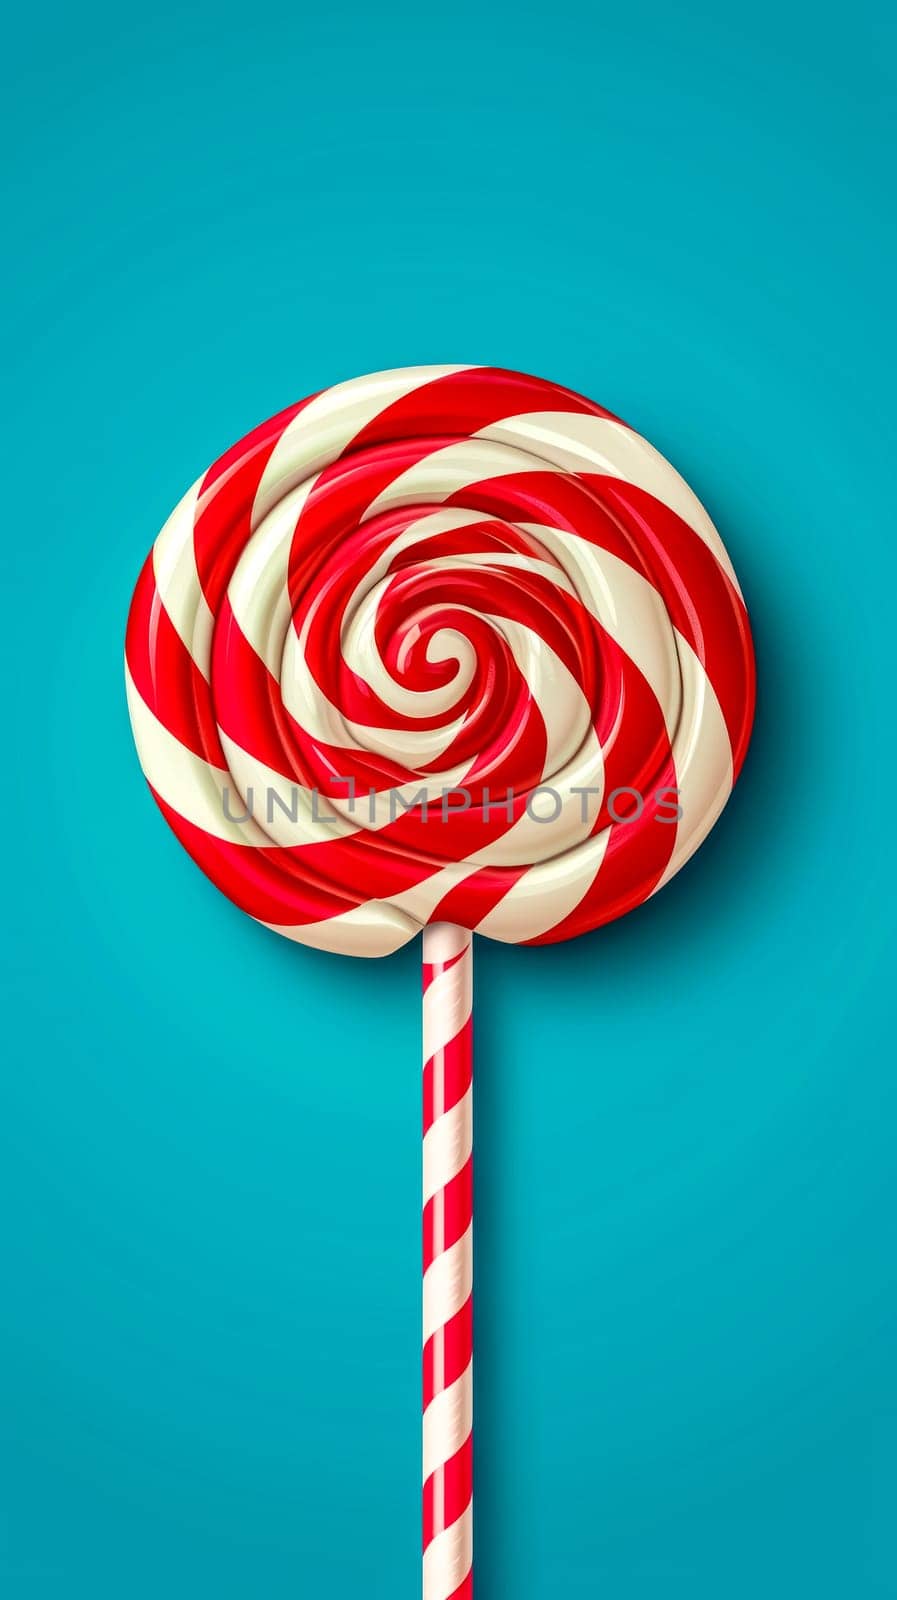 A vibrant red and white striped lollipop stands out against a bright turquoise background, creating a playful and appealing visual with a clear space for text or additional graphics, vertical